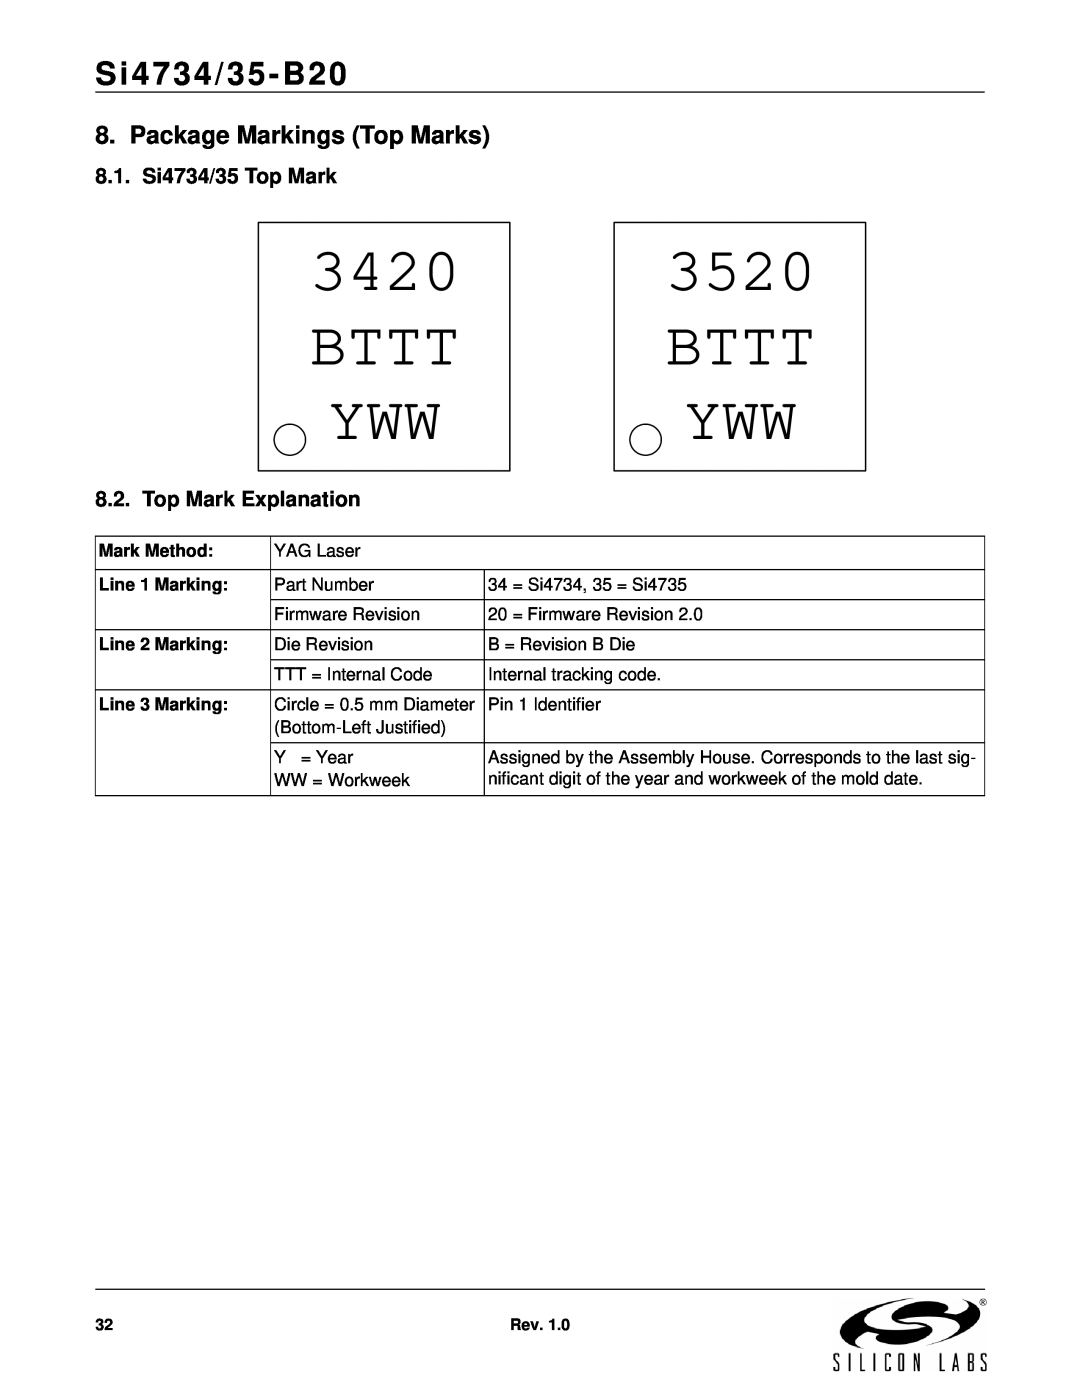 Silicon Laboratories SI4734/35-B20 Package Markings Top Marks, 8.1. Si4734/35 Top Mark, Top Mark Explanation, Bttt Yww 